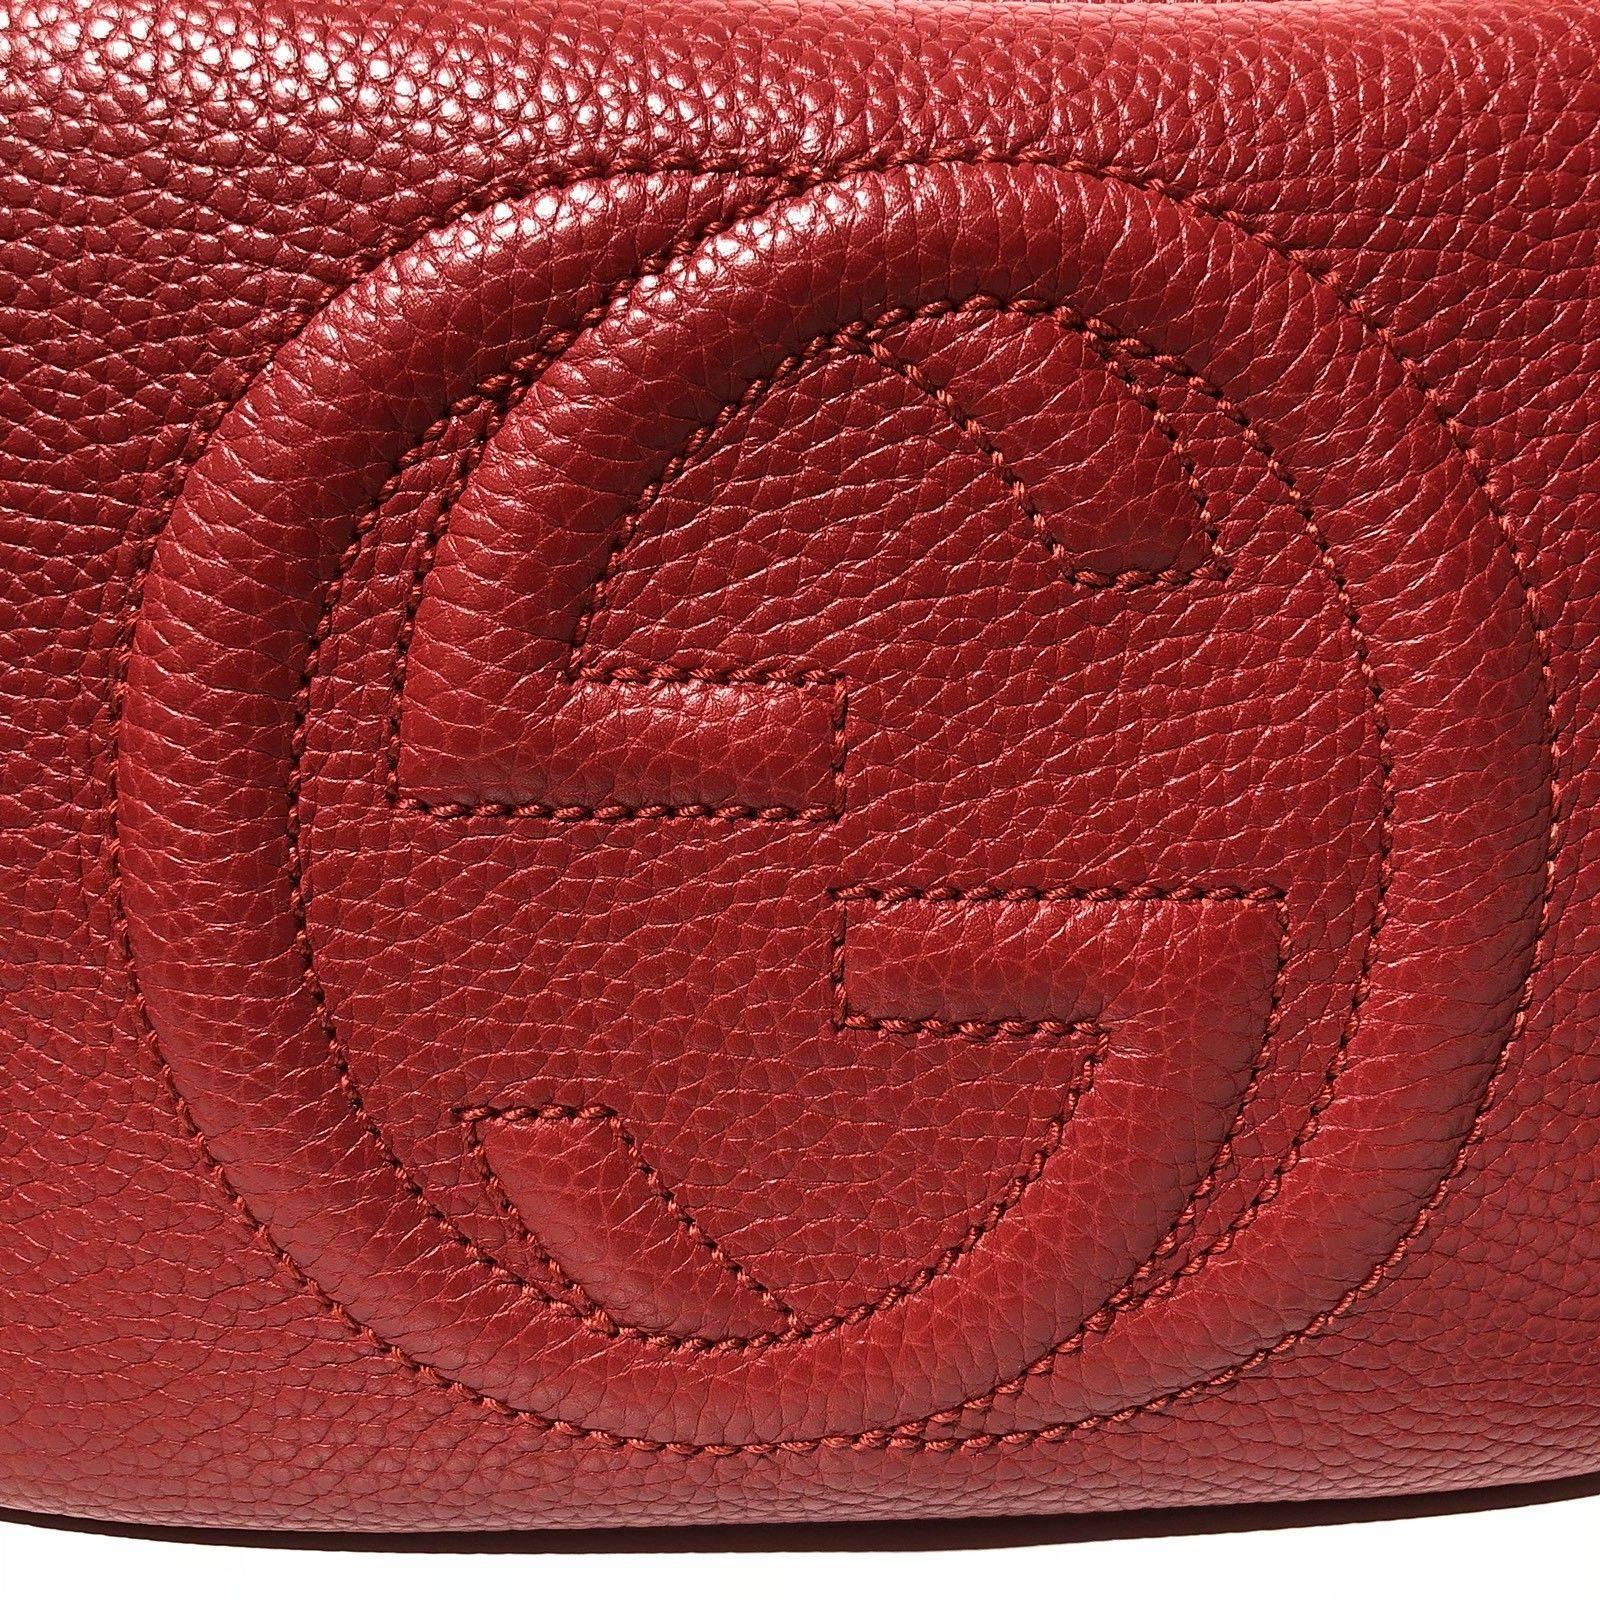 Gucci Soho Disco Leather Shoulder Crossbody Bag red new 4